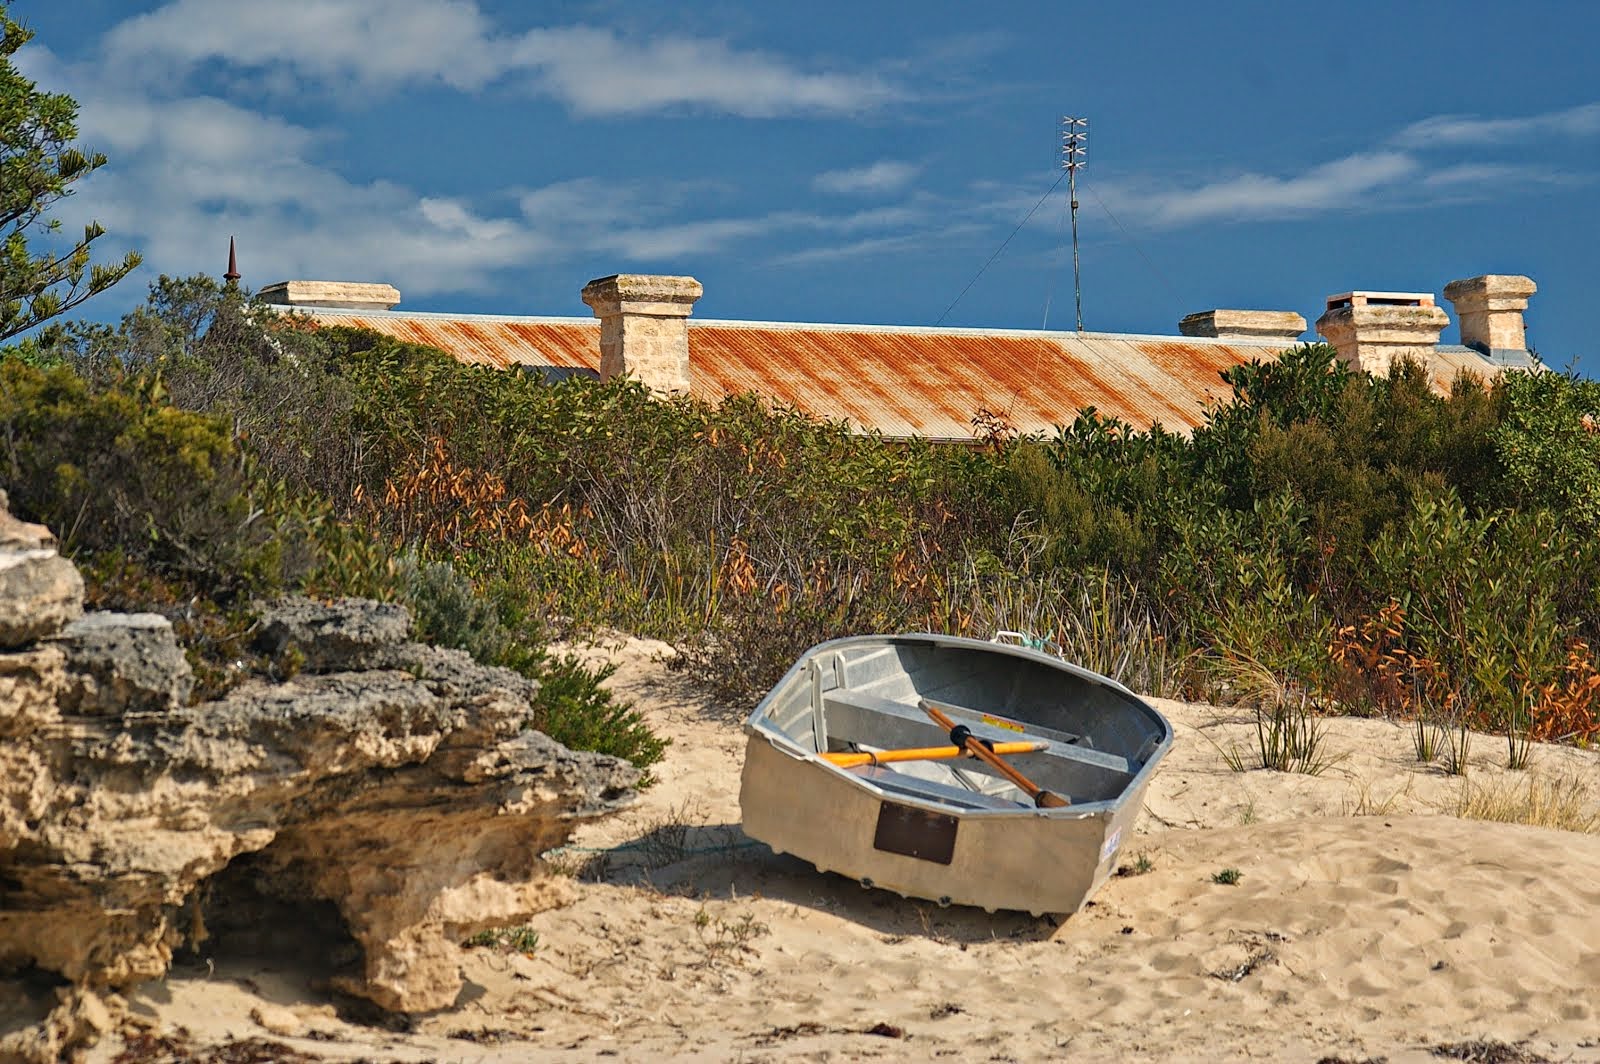 A Boat on the Sand in Robe